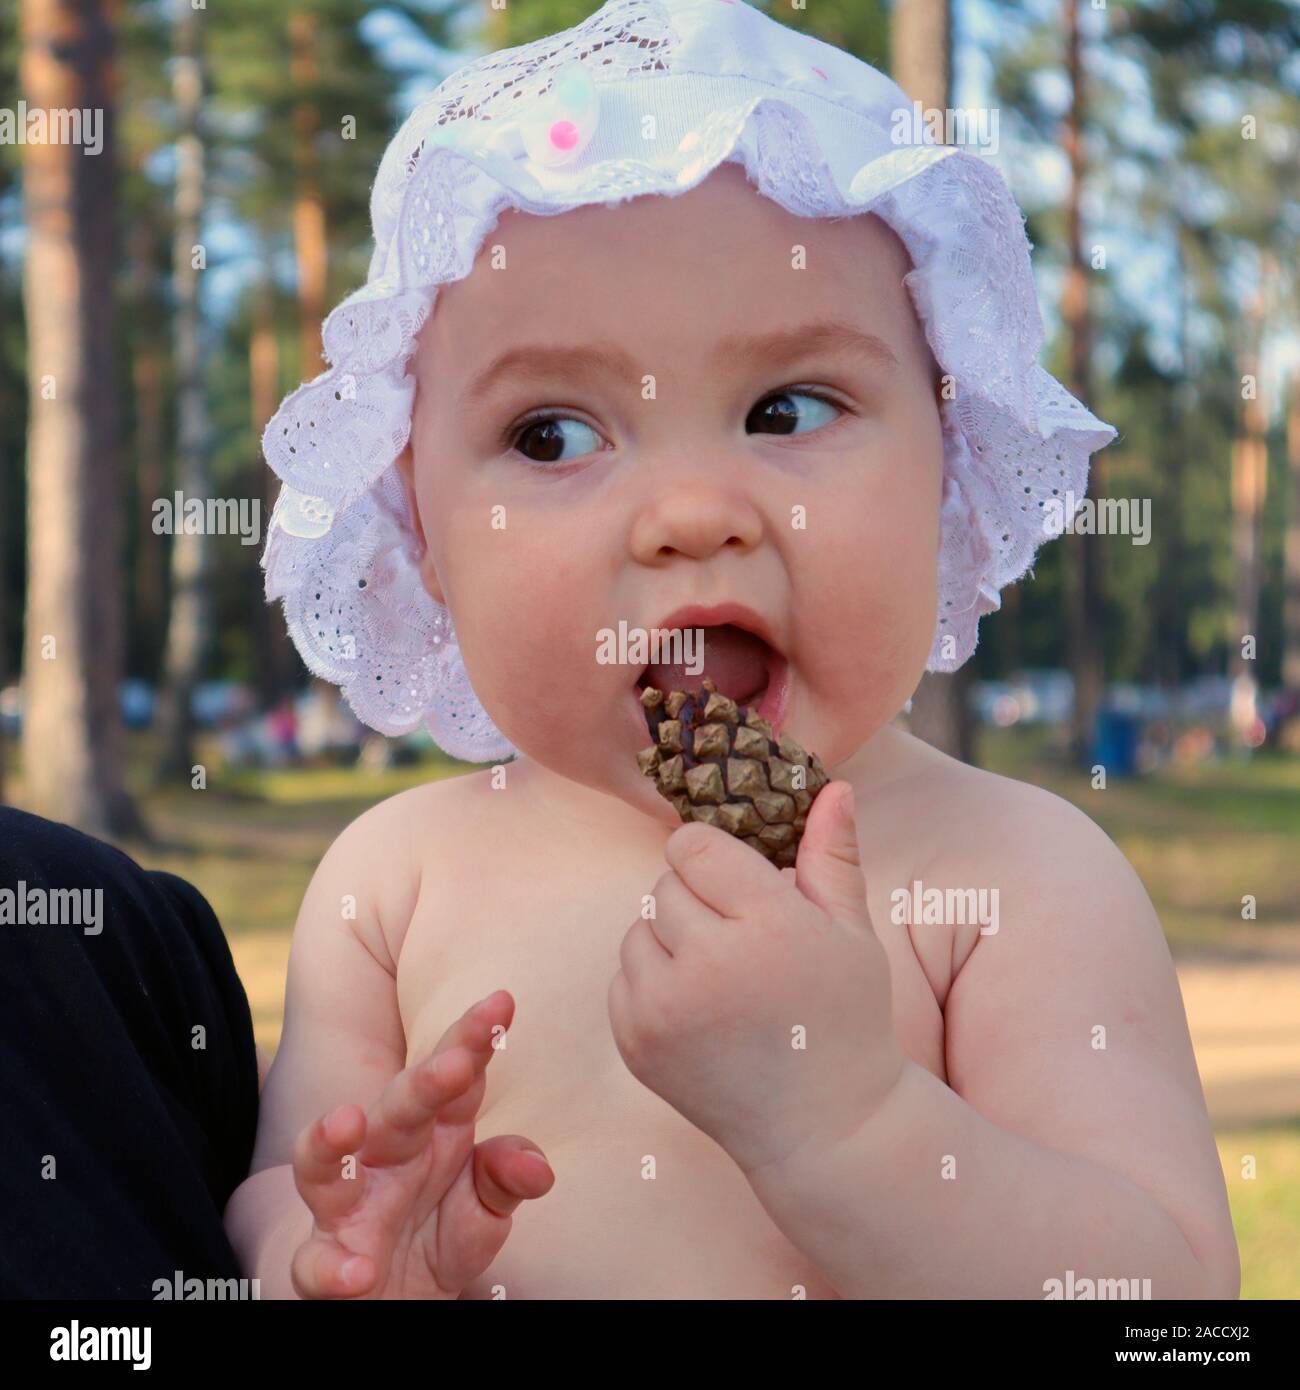 Adorable baby girl dressed in a cap with ruffles playing with pine cone outdoors Stock Photo